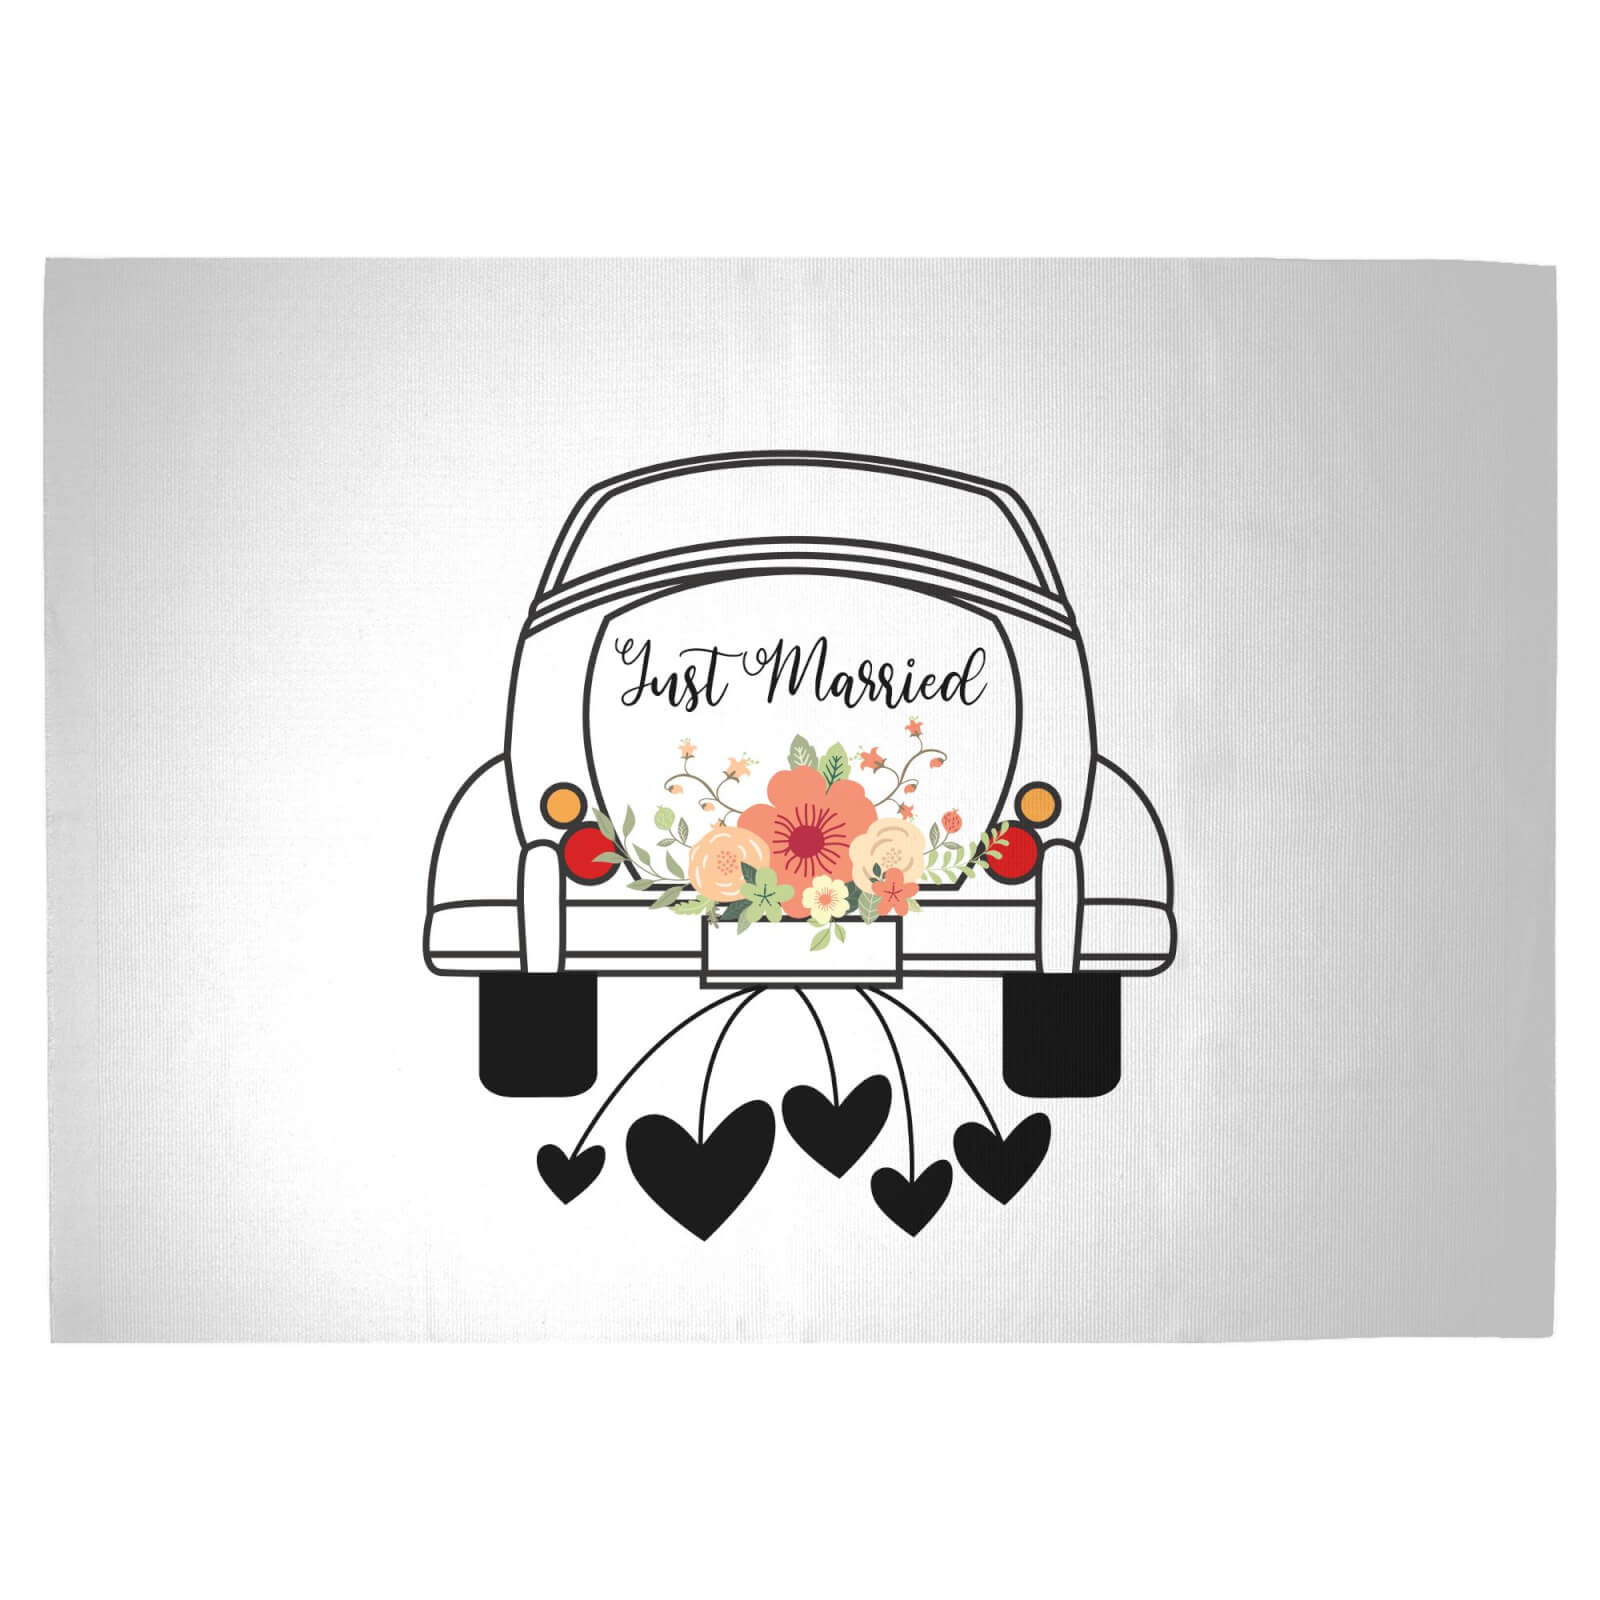 Just Married Car Woven Rug - Large